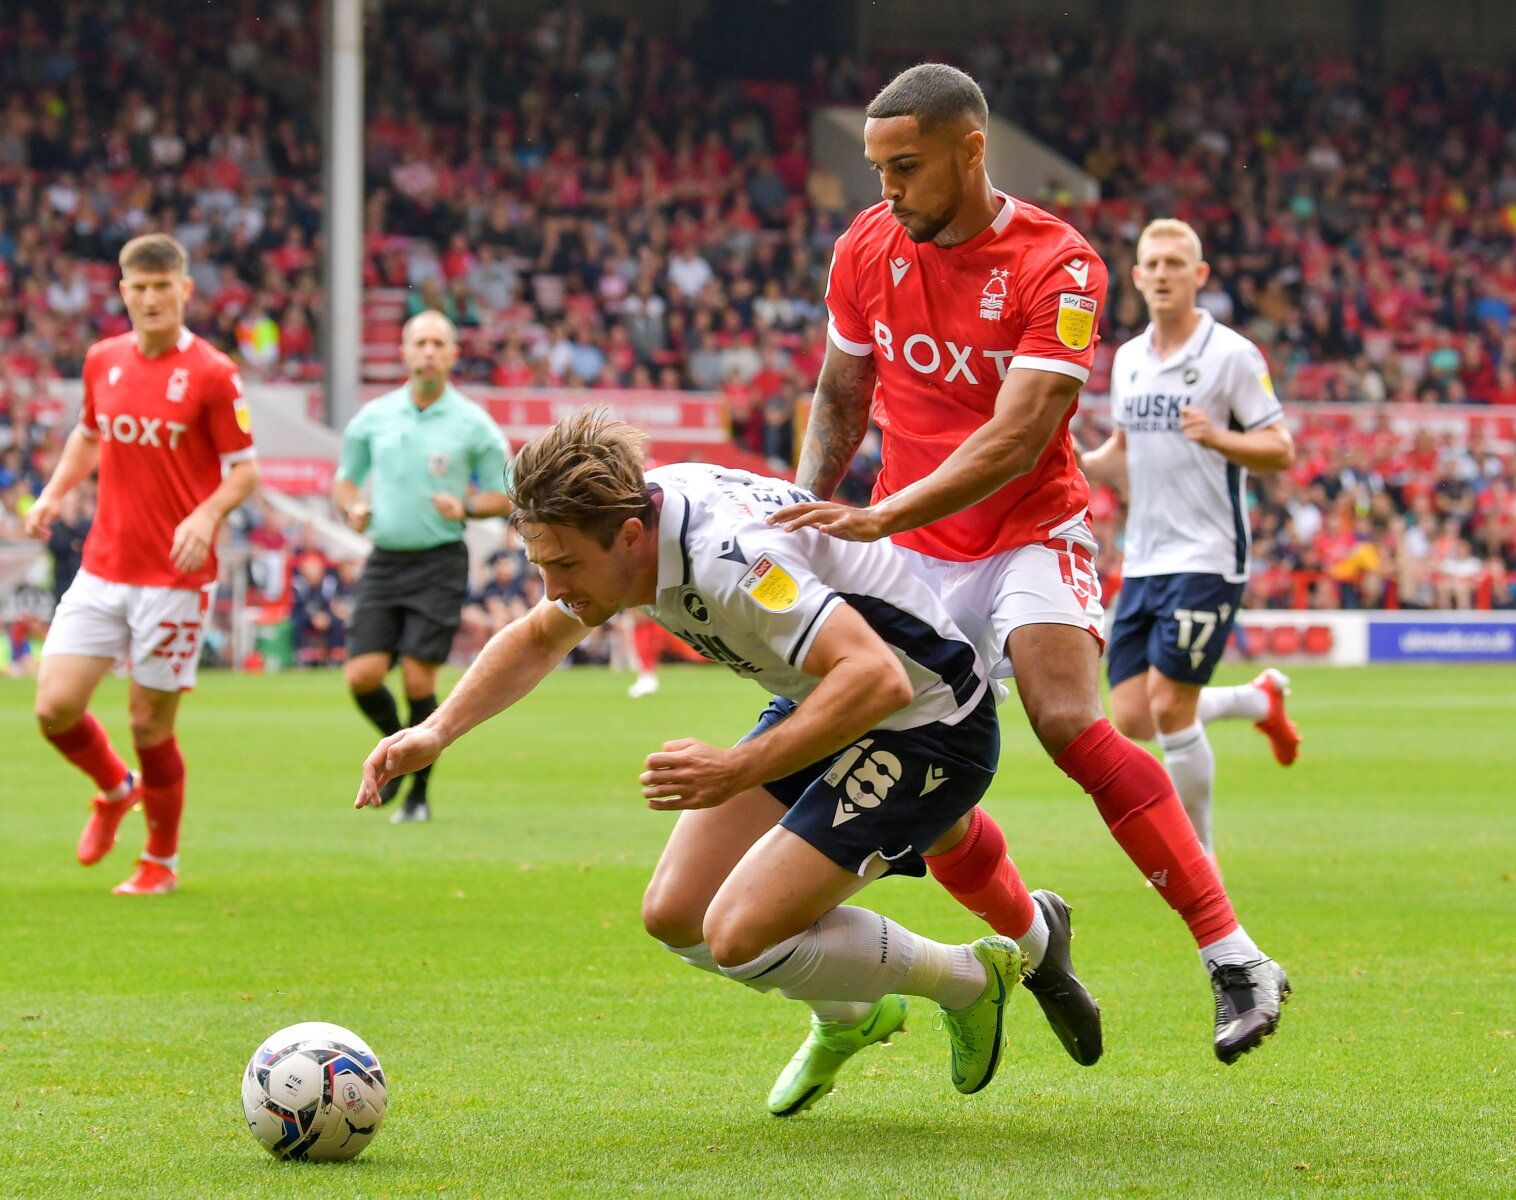 Soccer Football - Championship - Nottingham Forest v Millwall - The City Ground, Nottingham, Britain - September 25, 2021 Nottingham Forest's Max Lowe in action with Millwall's Ryan Leonard. Action Images/Paul Burrows    EDITORIAL USE ONLY. No use with unauthorized audio, video, data, fixture lists, club/league logos or 